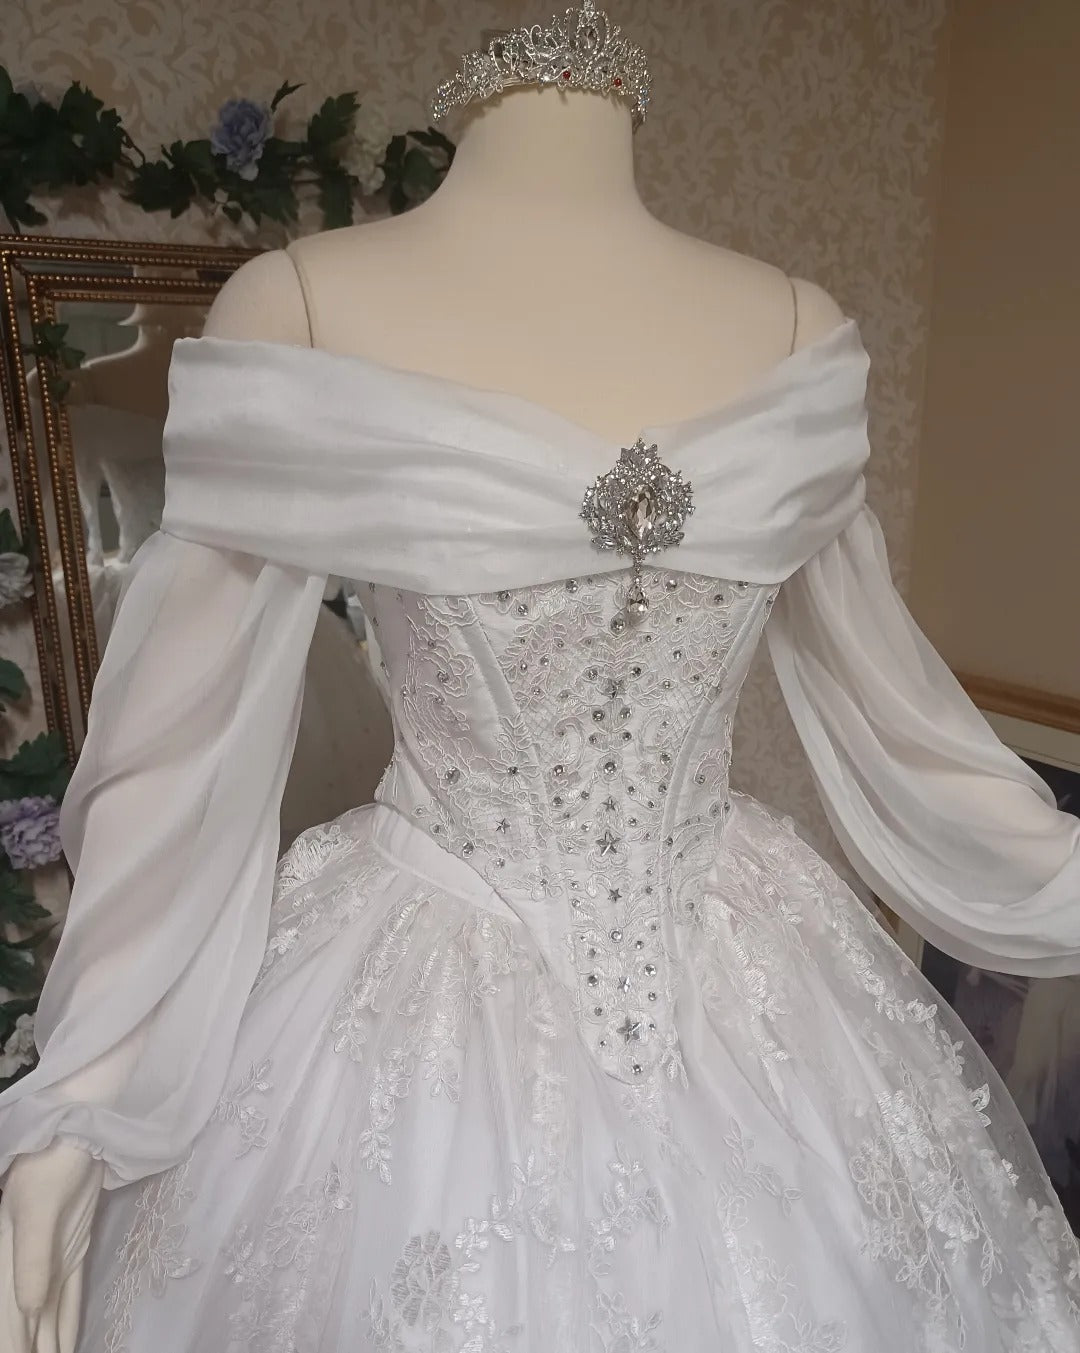 White Victorian Belle Style Gown with Rhinestones and Stars